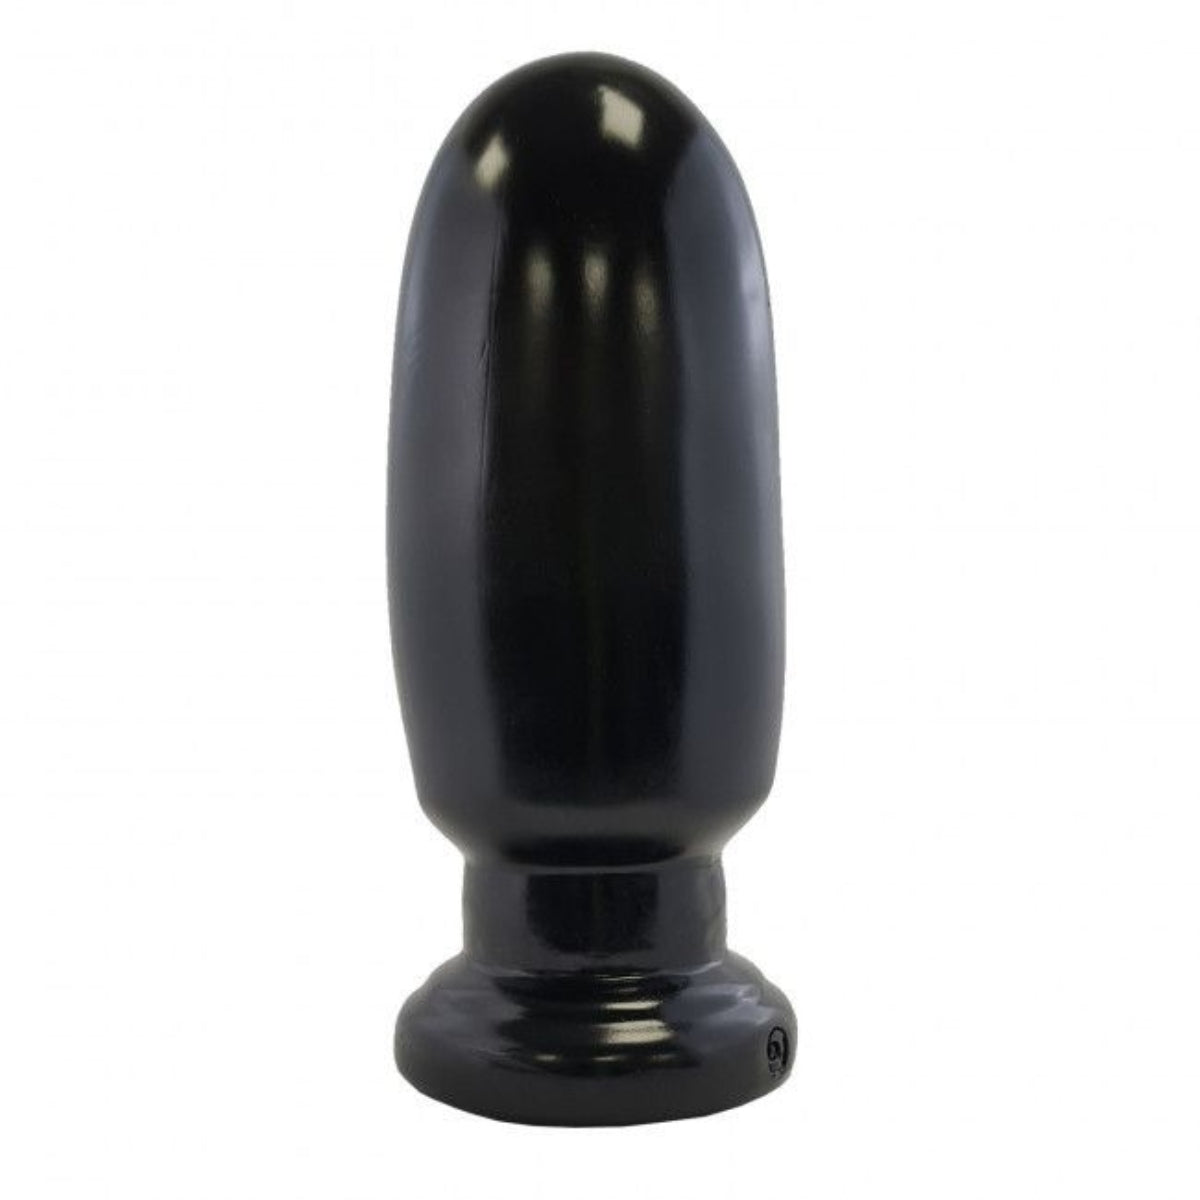 Prowler RED Thud Butt Plug Black 9 Inch